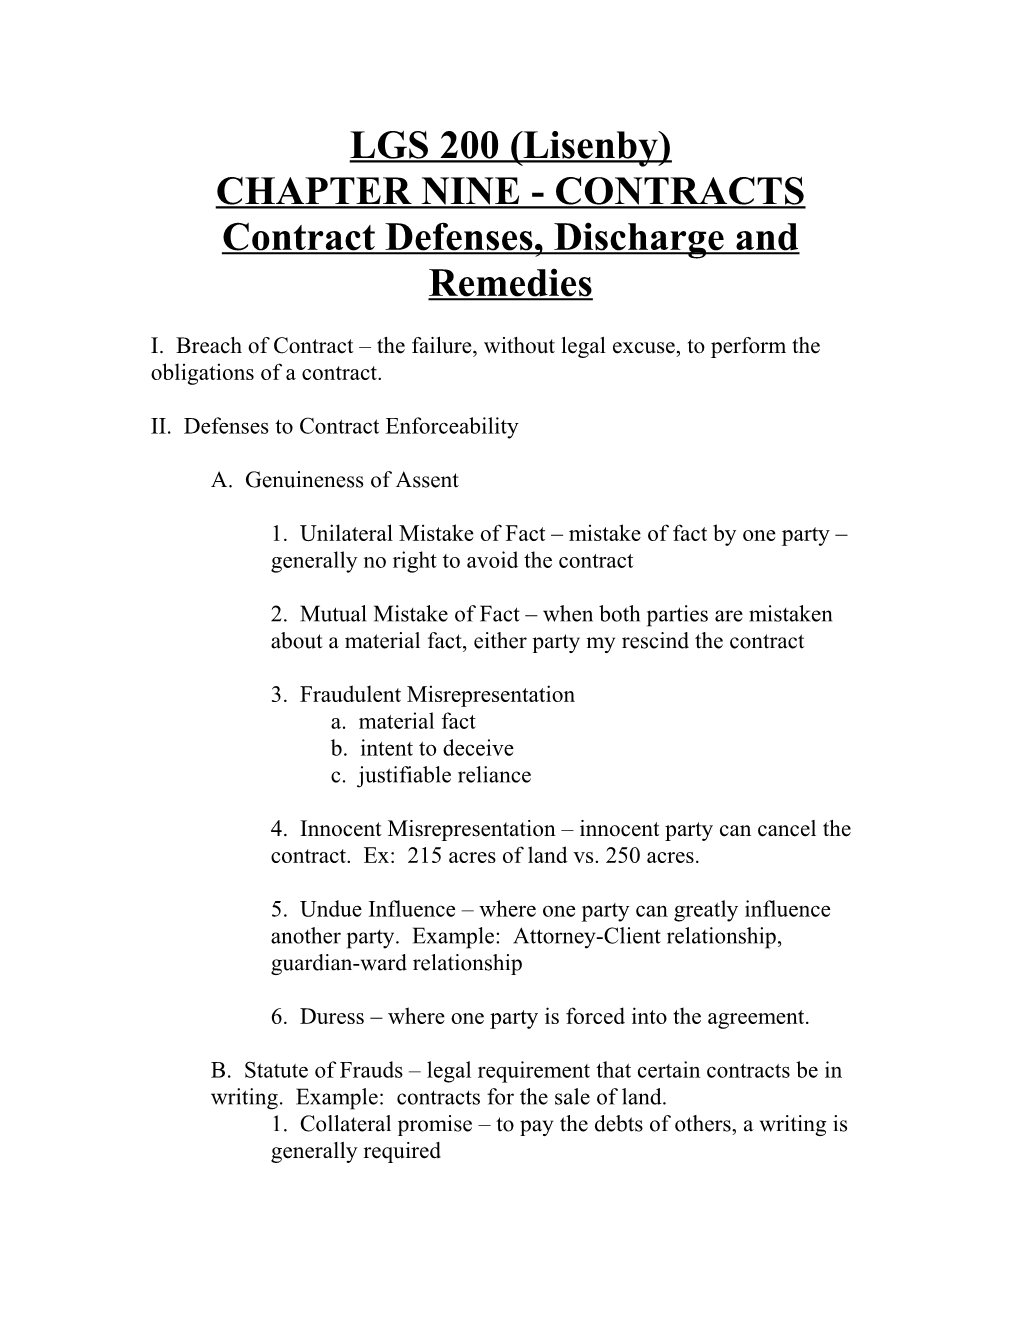 Chapter 12 Contract Defenses, Discharge and Remedies